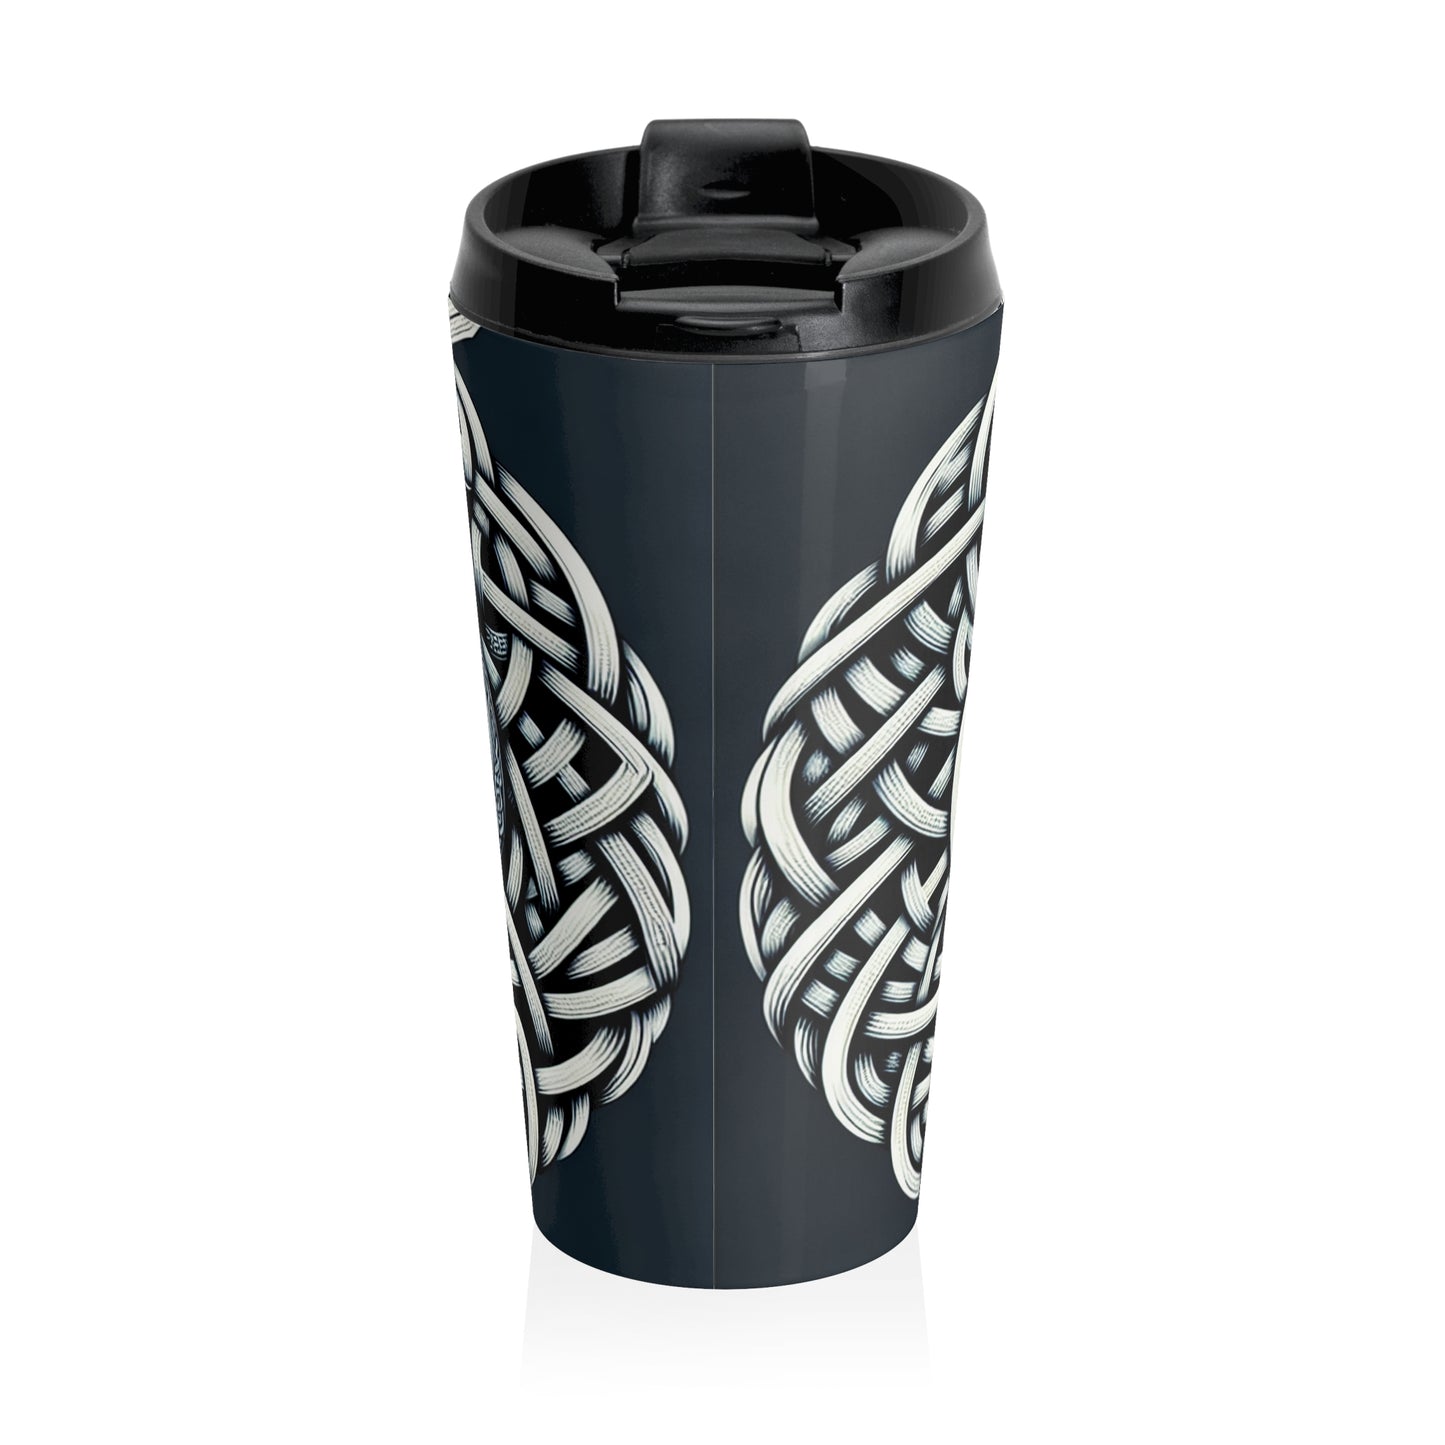 "Celtic Knight: Sword & Shield in Ancient Knots" - The Alien Stainless Steel Travel Mug Celtic Art Style